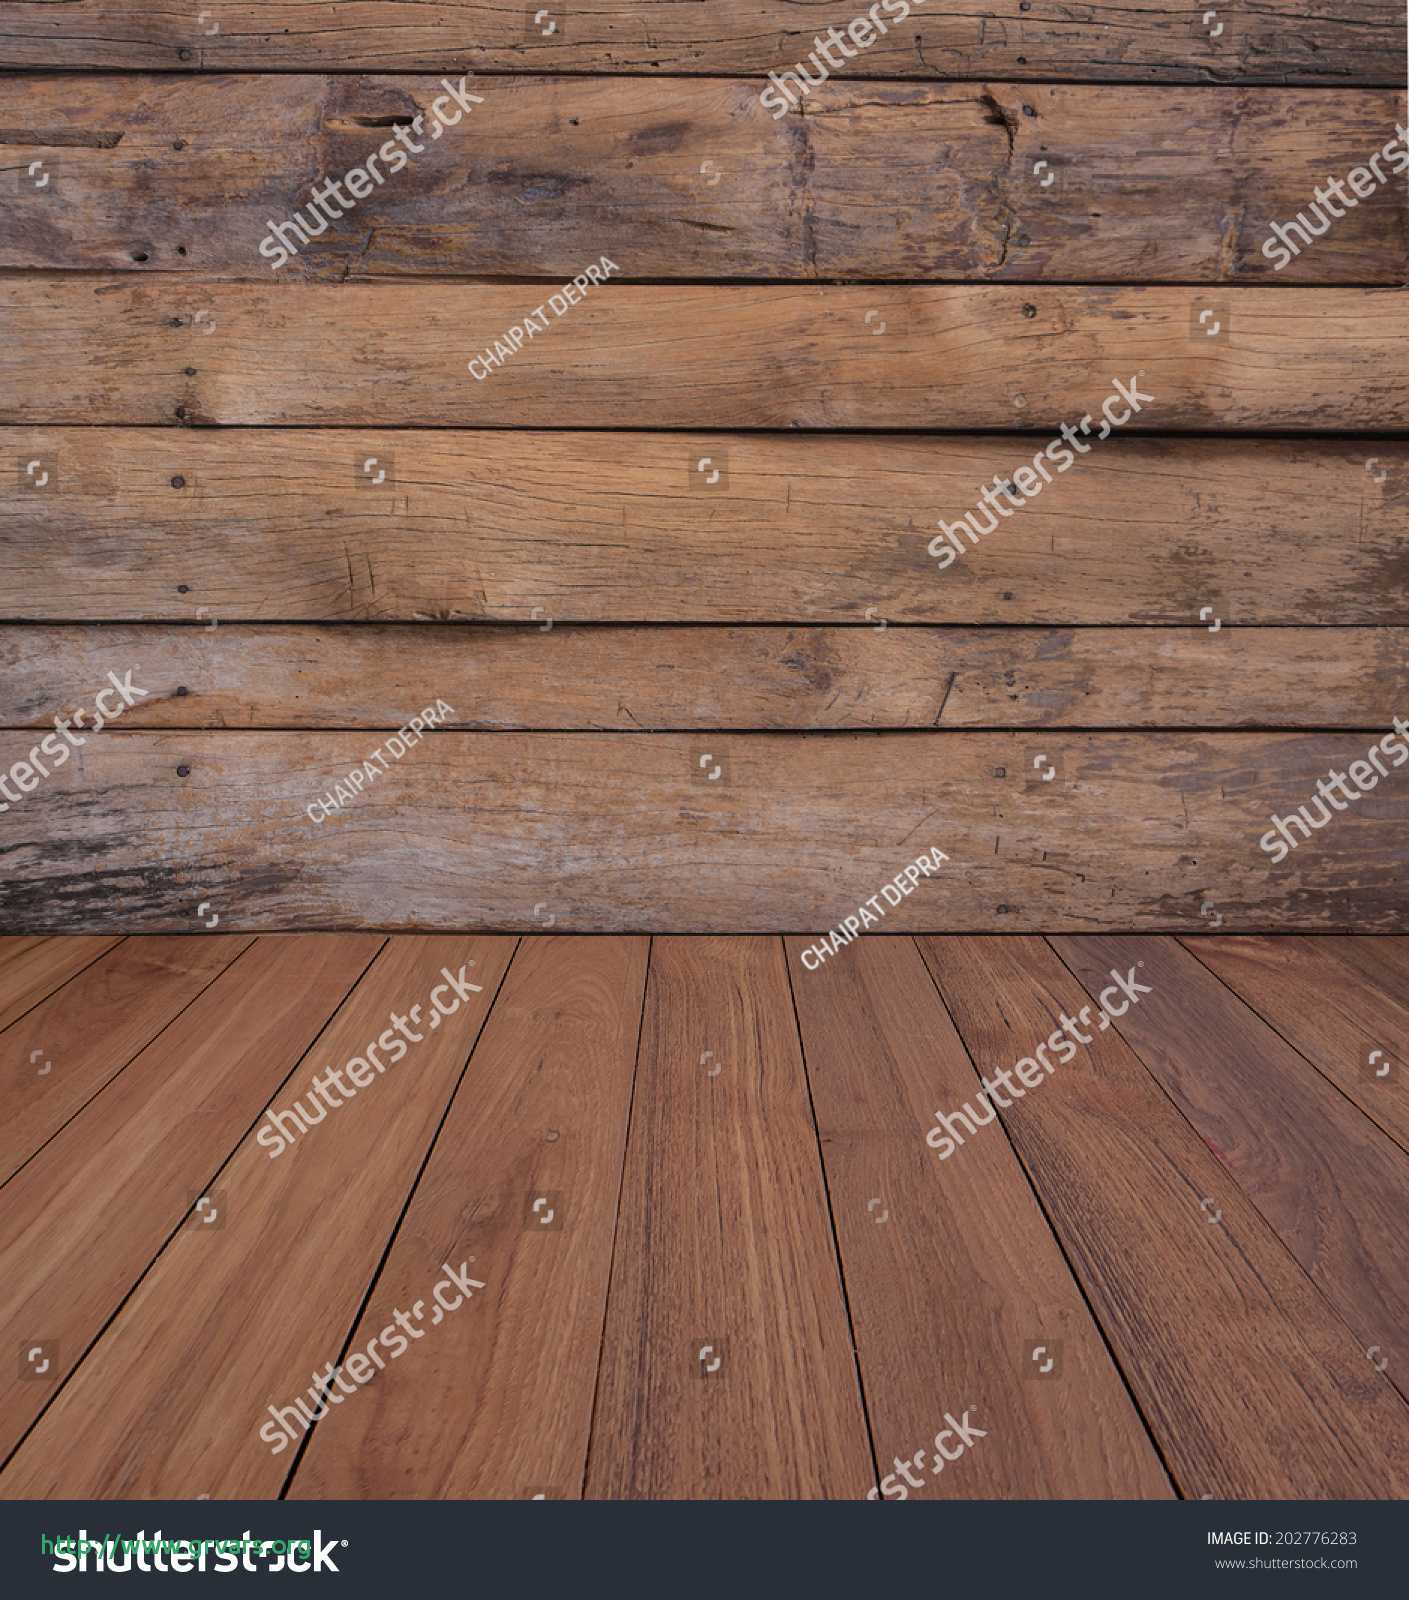 10 Fantastic Prefinished Hardwood Flooring for Sale 2022 free download prefinished hardwood flooring for sale of 16 inspirant how to lay out wood flooring ideas blog within prices how to lay out wood flooring beau od wood wall wood floor stock royalty free